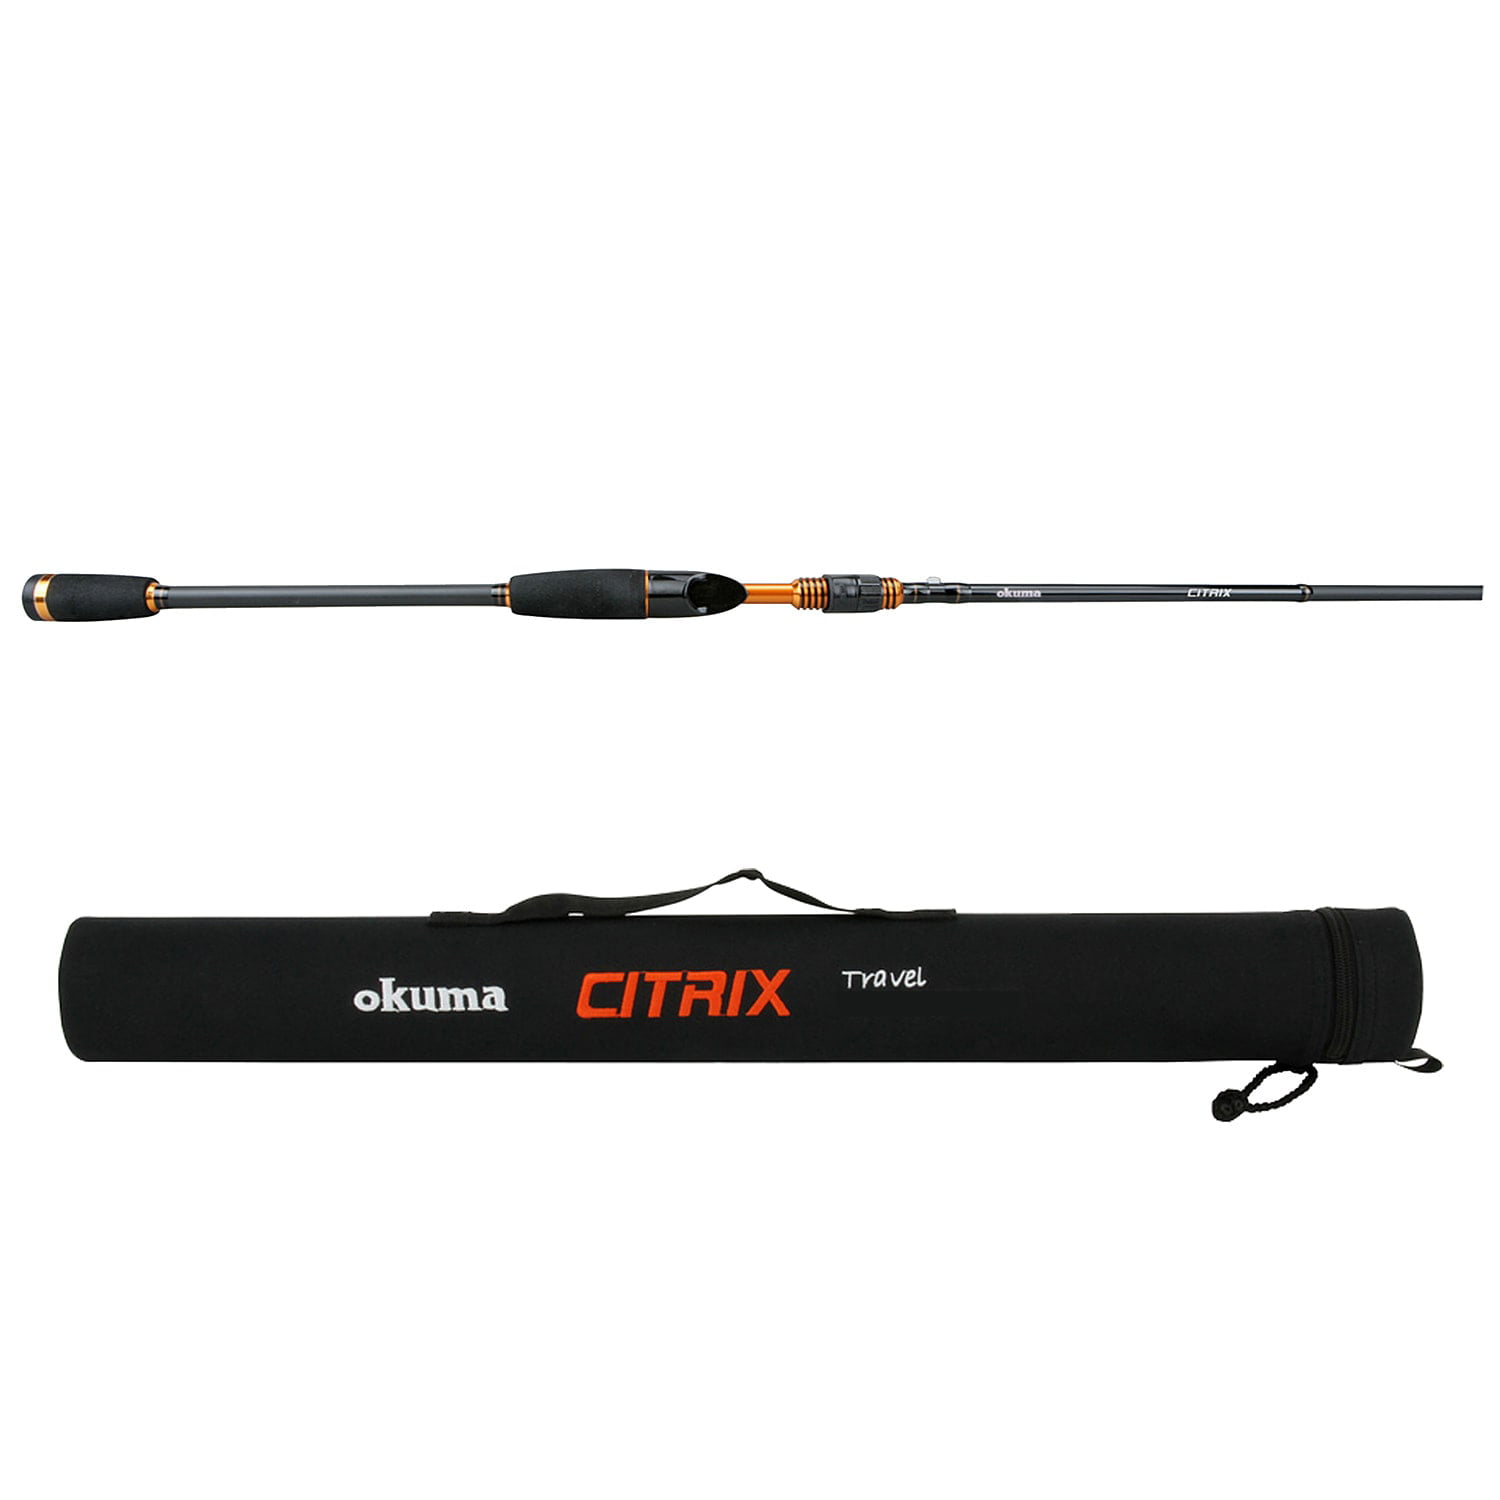 Okuma Citrix Travel Rod 4pc Spinning 6ft 6in ML with Case 